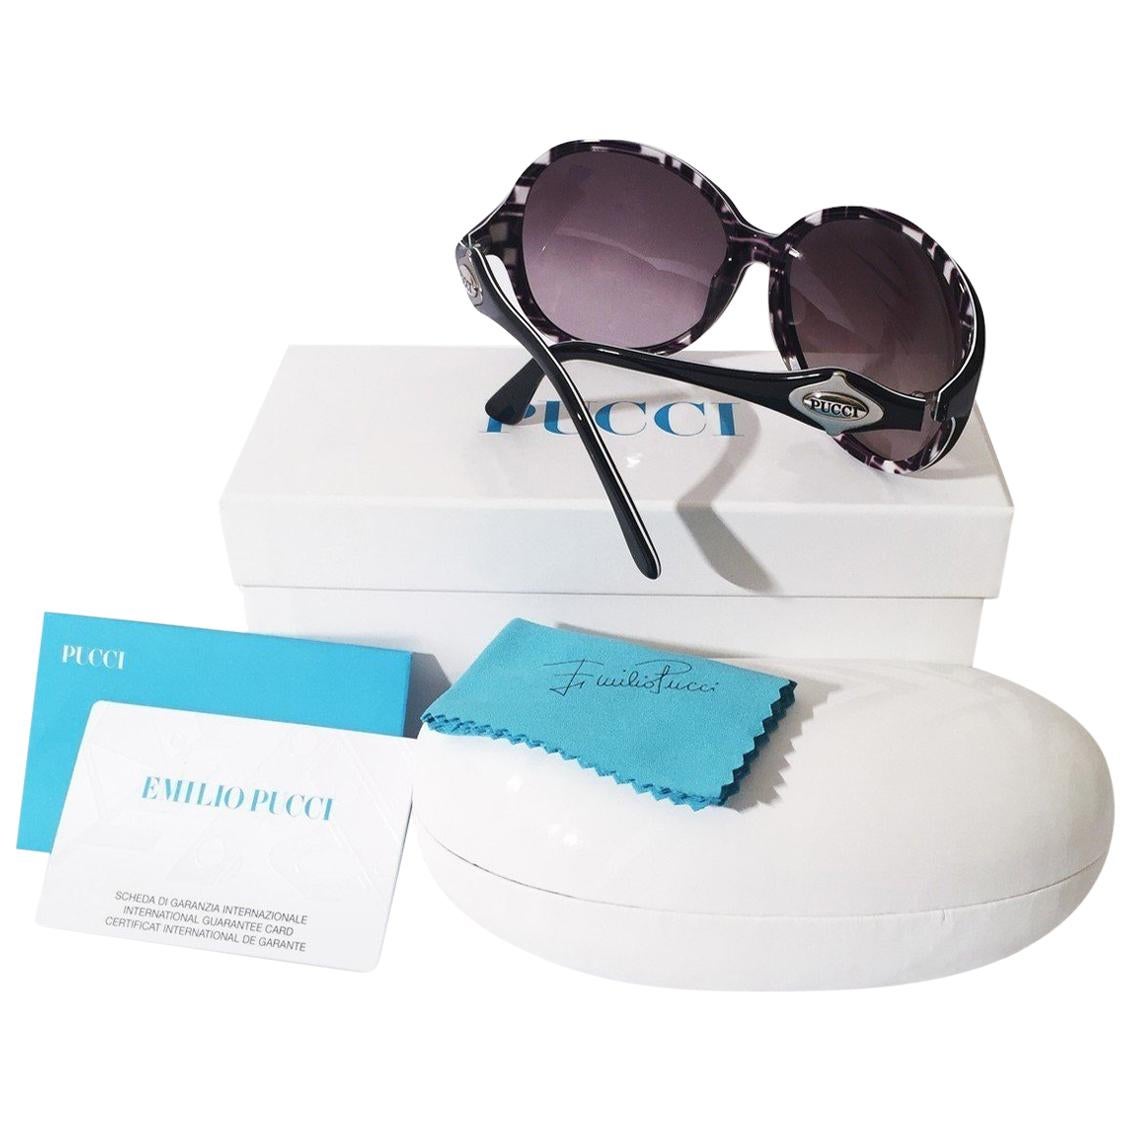 Emilio Pucci Sunglasses
Brand New
* Stunning Classic Pucci Sunglasses
* Classic Black Frames
* Pucci Print Interior:
* Black, White & Light Pink
* Silver Pucci Logo on Both Sides
* Handmade ZYL in Italy
* 100% UV Protection
* Comes with Case,